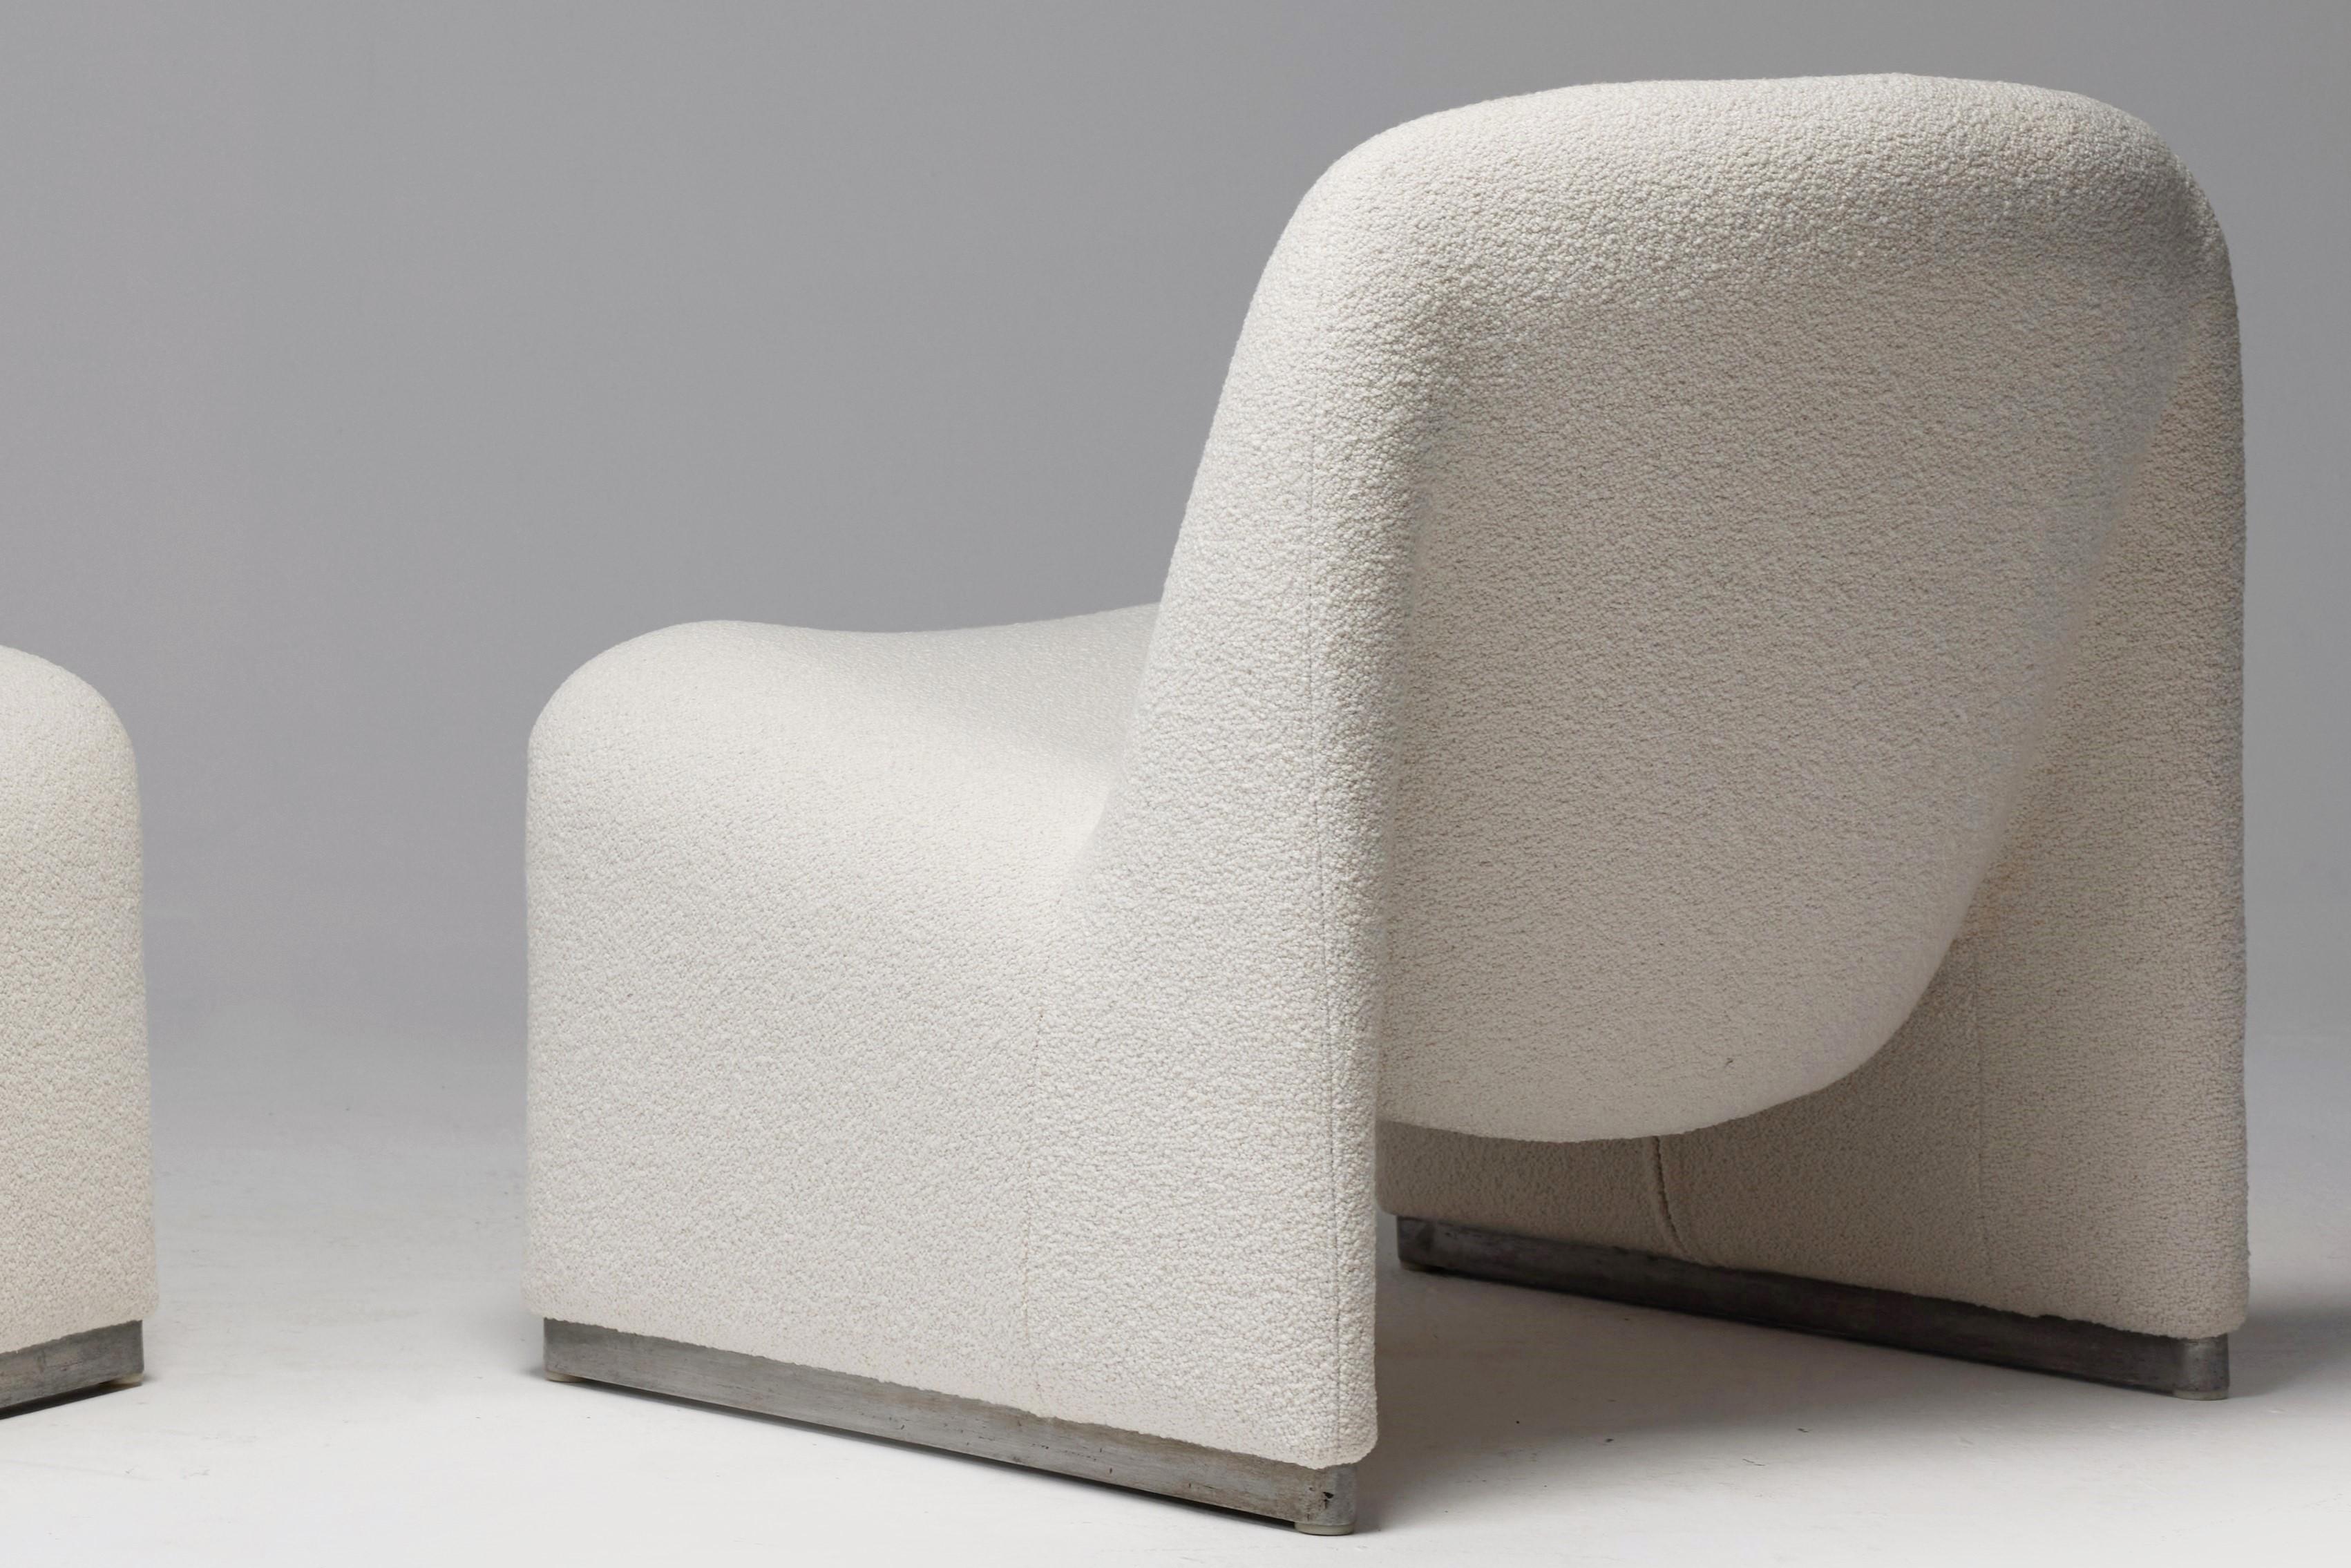 Bouclé Vintage Alky Chairs in Off-White Fabric by Giancarlo Piretti for Artifort, 1970s For Sale